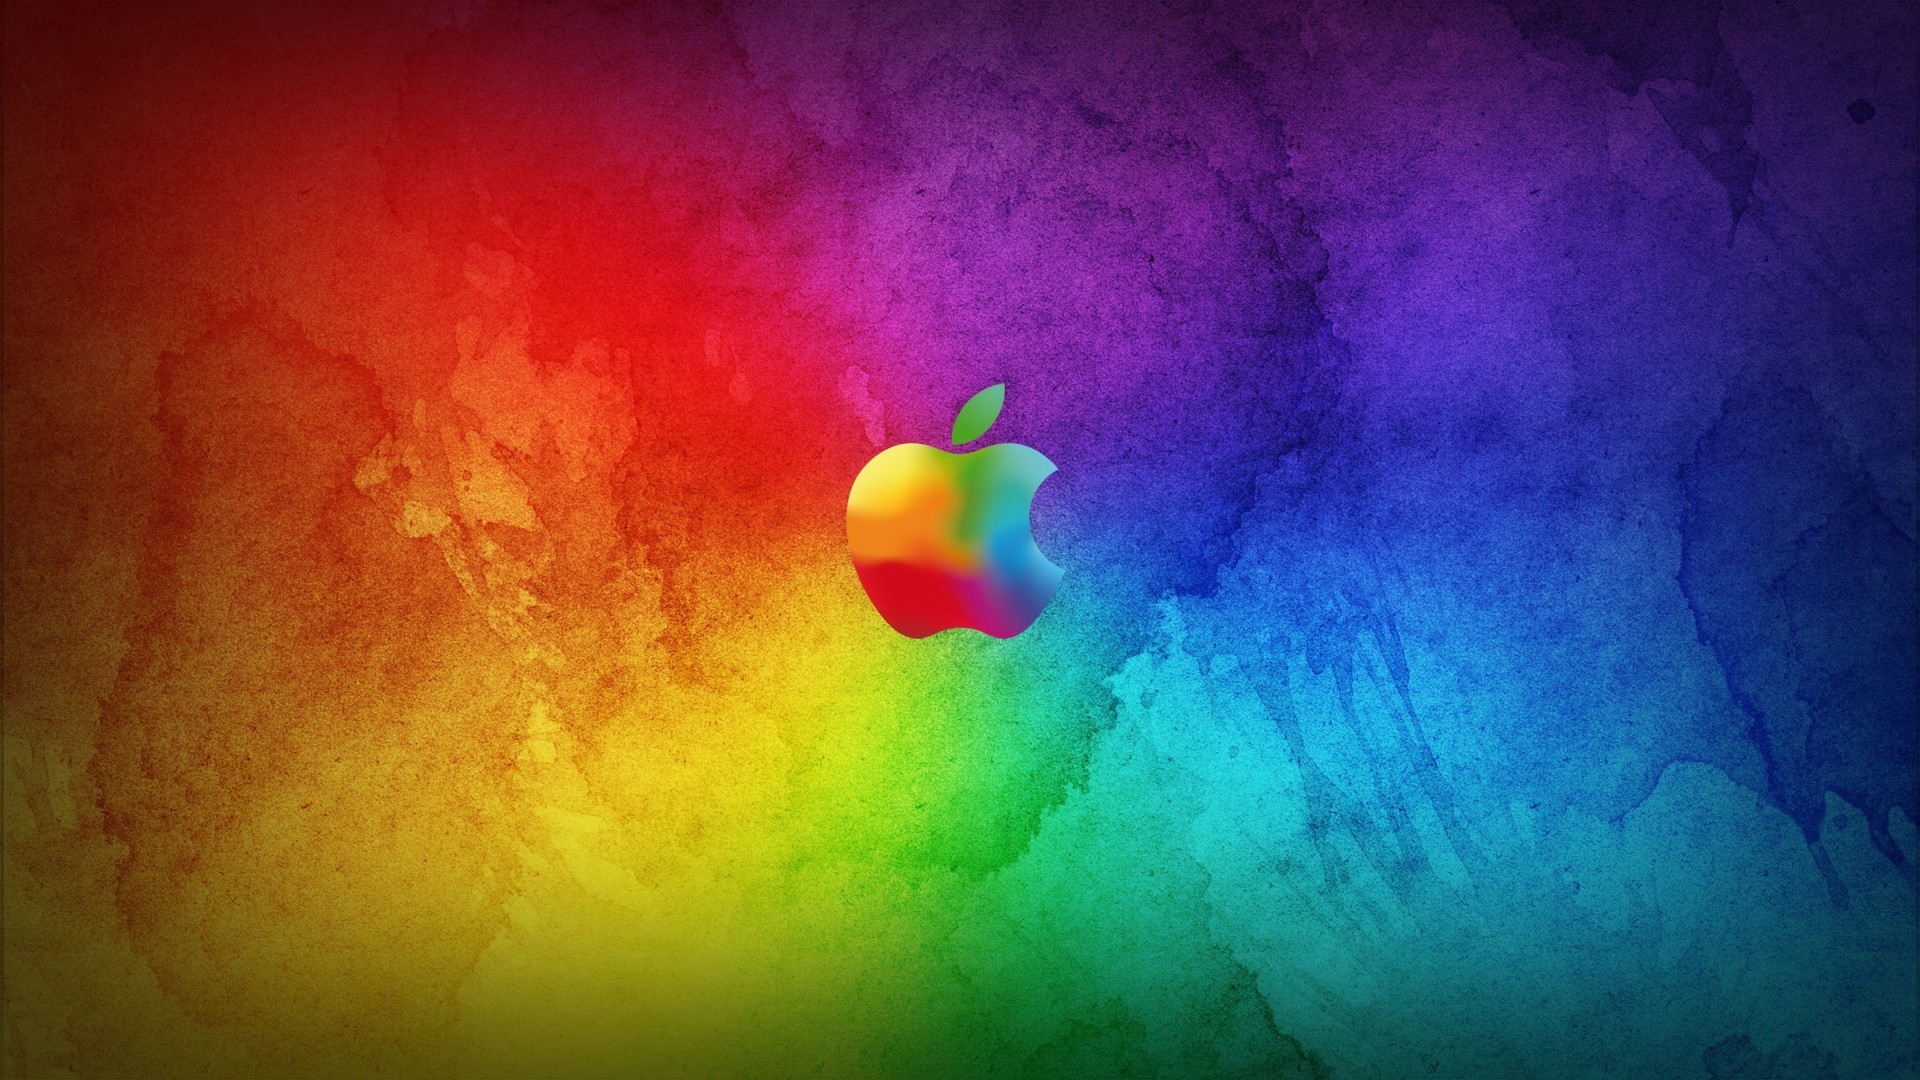 1920x1080 ... Background Full HD 1080p.  Wallpaper apple, colorful,  background, brand, logo, bright